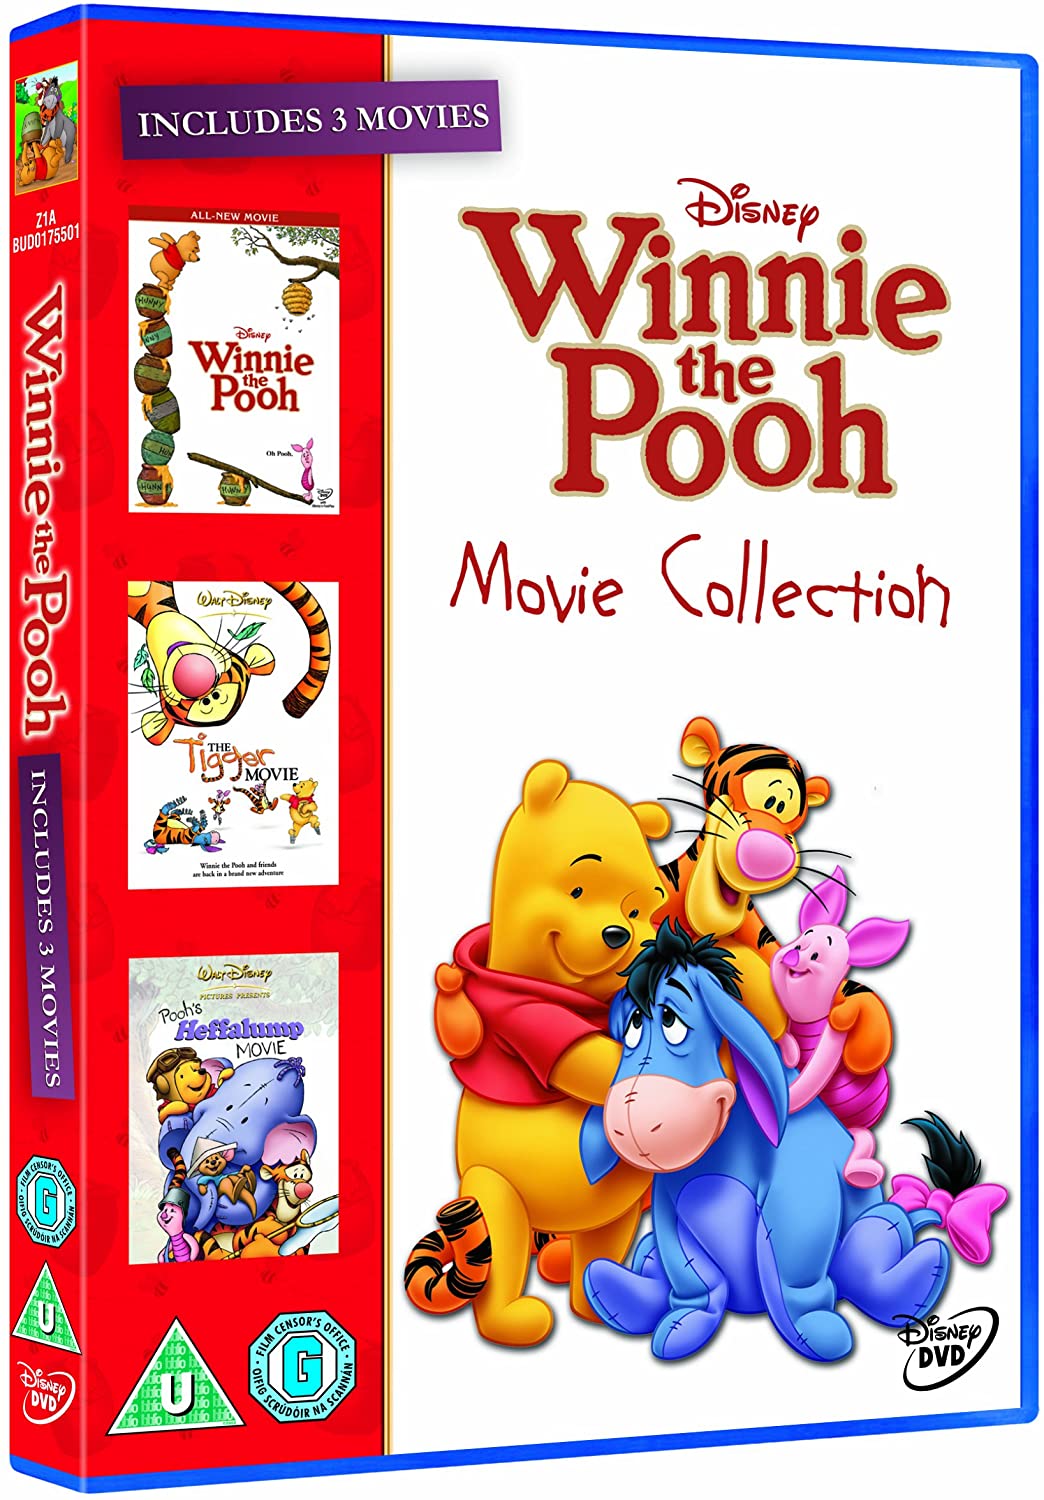 The Winnie the Pooh Movie Collection